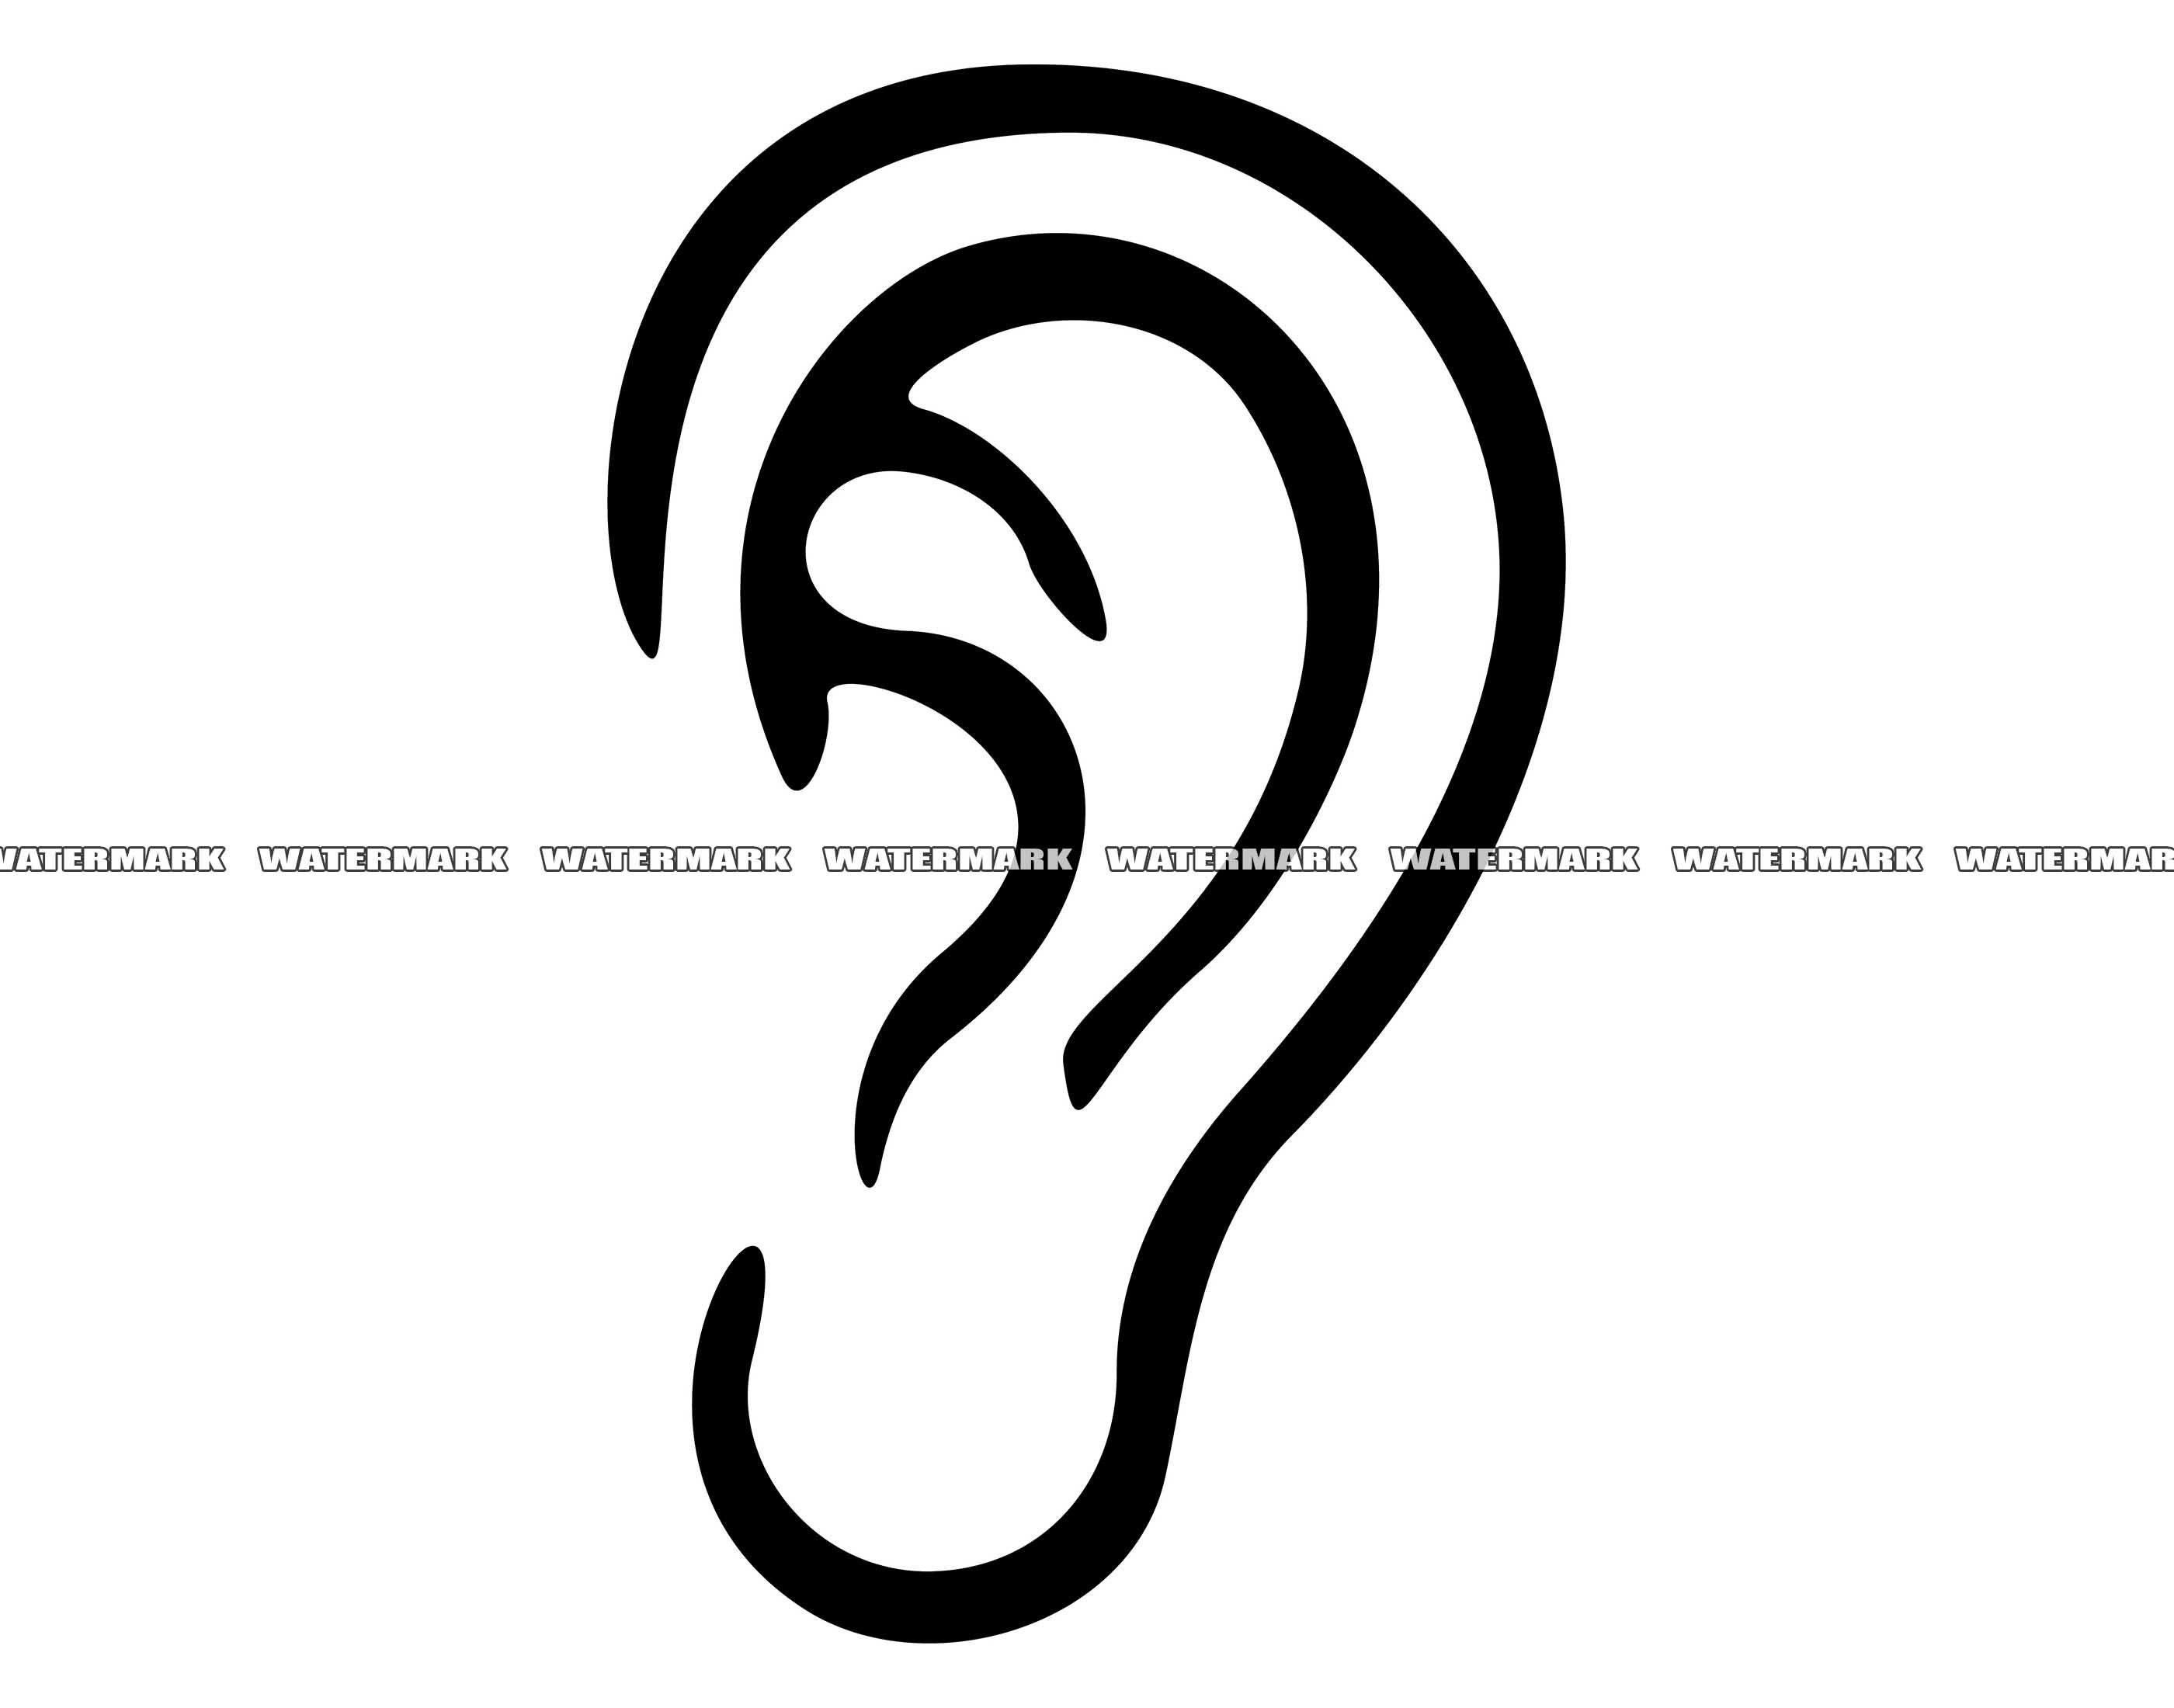 Line Art Drawing Ear PNG, Clipart, Adult, Angle, Arm, Art, Artist Free PNG  Download